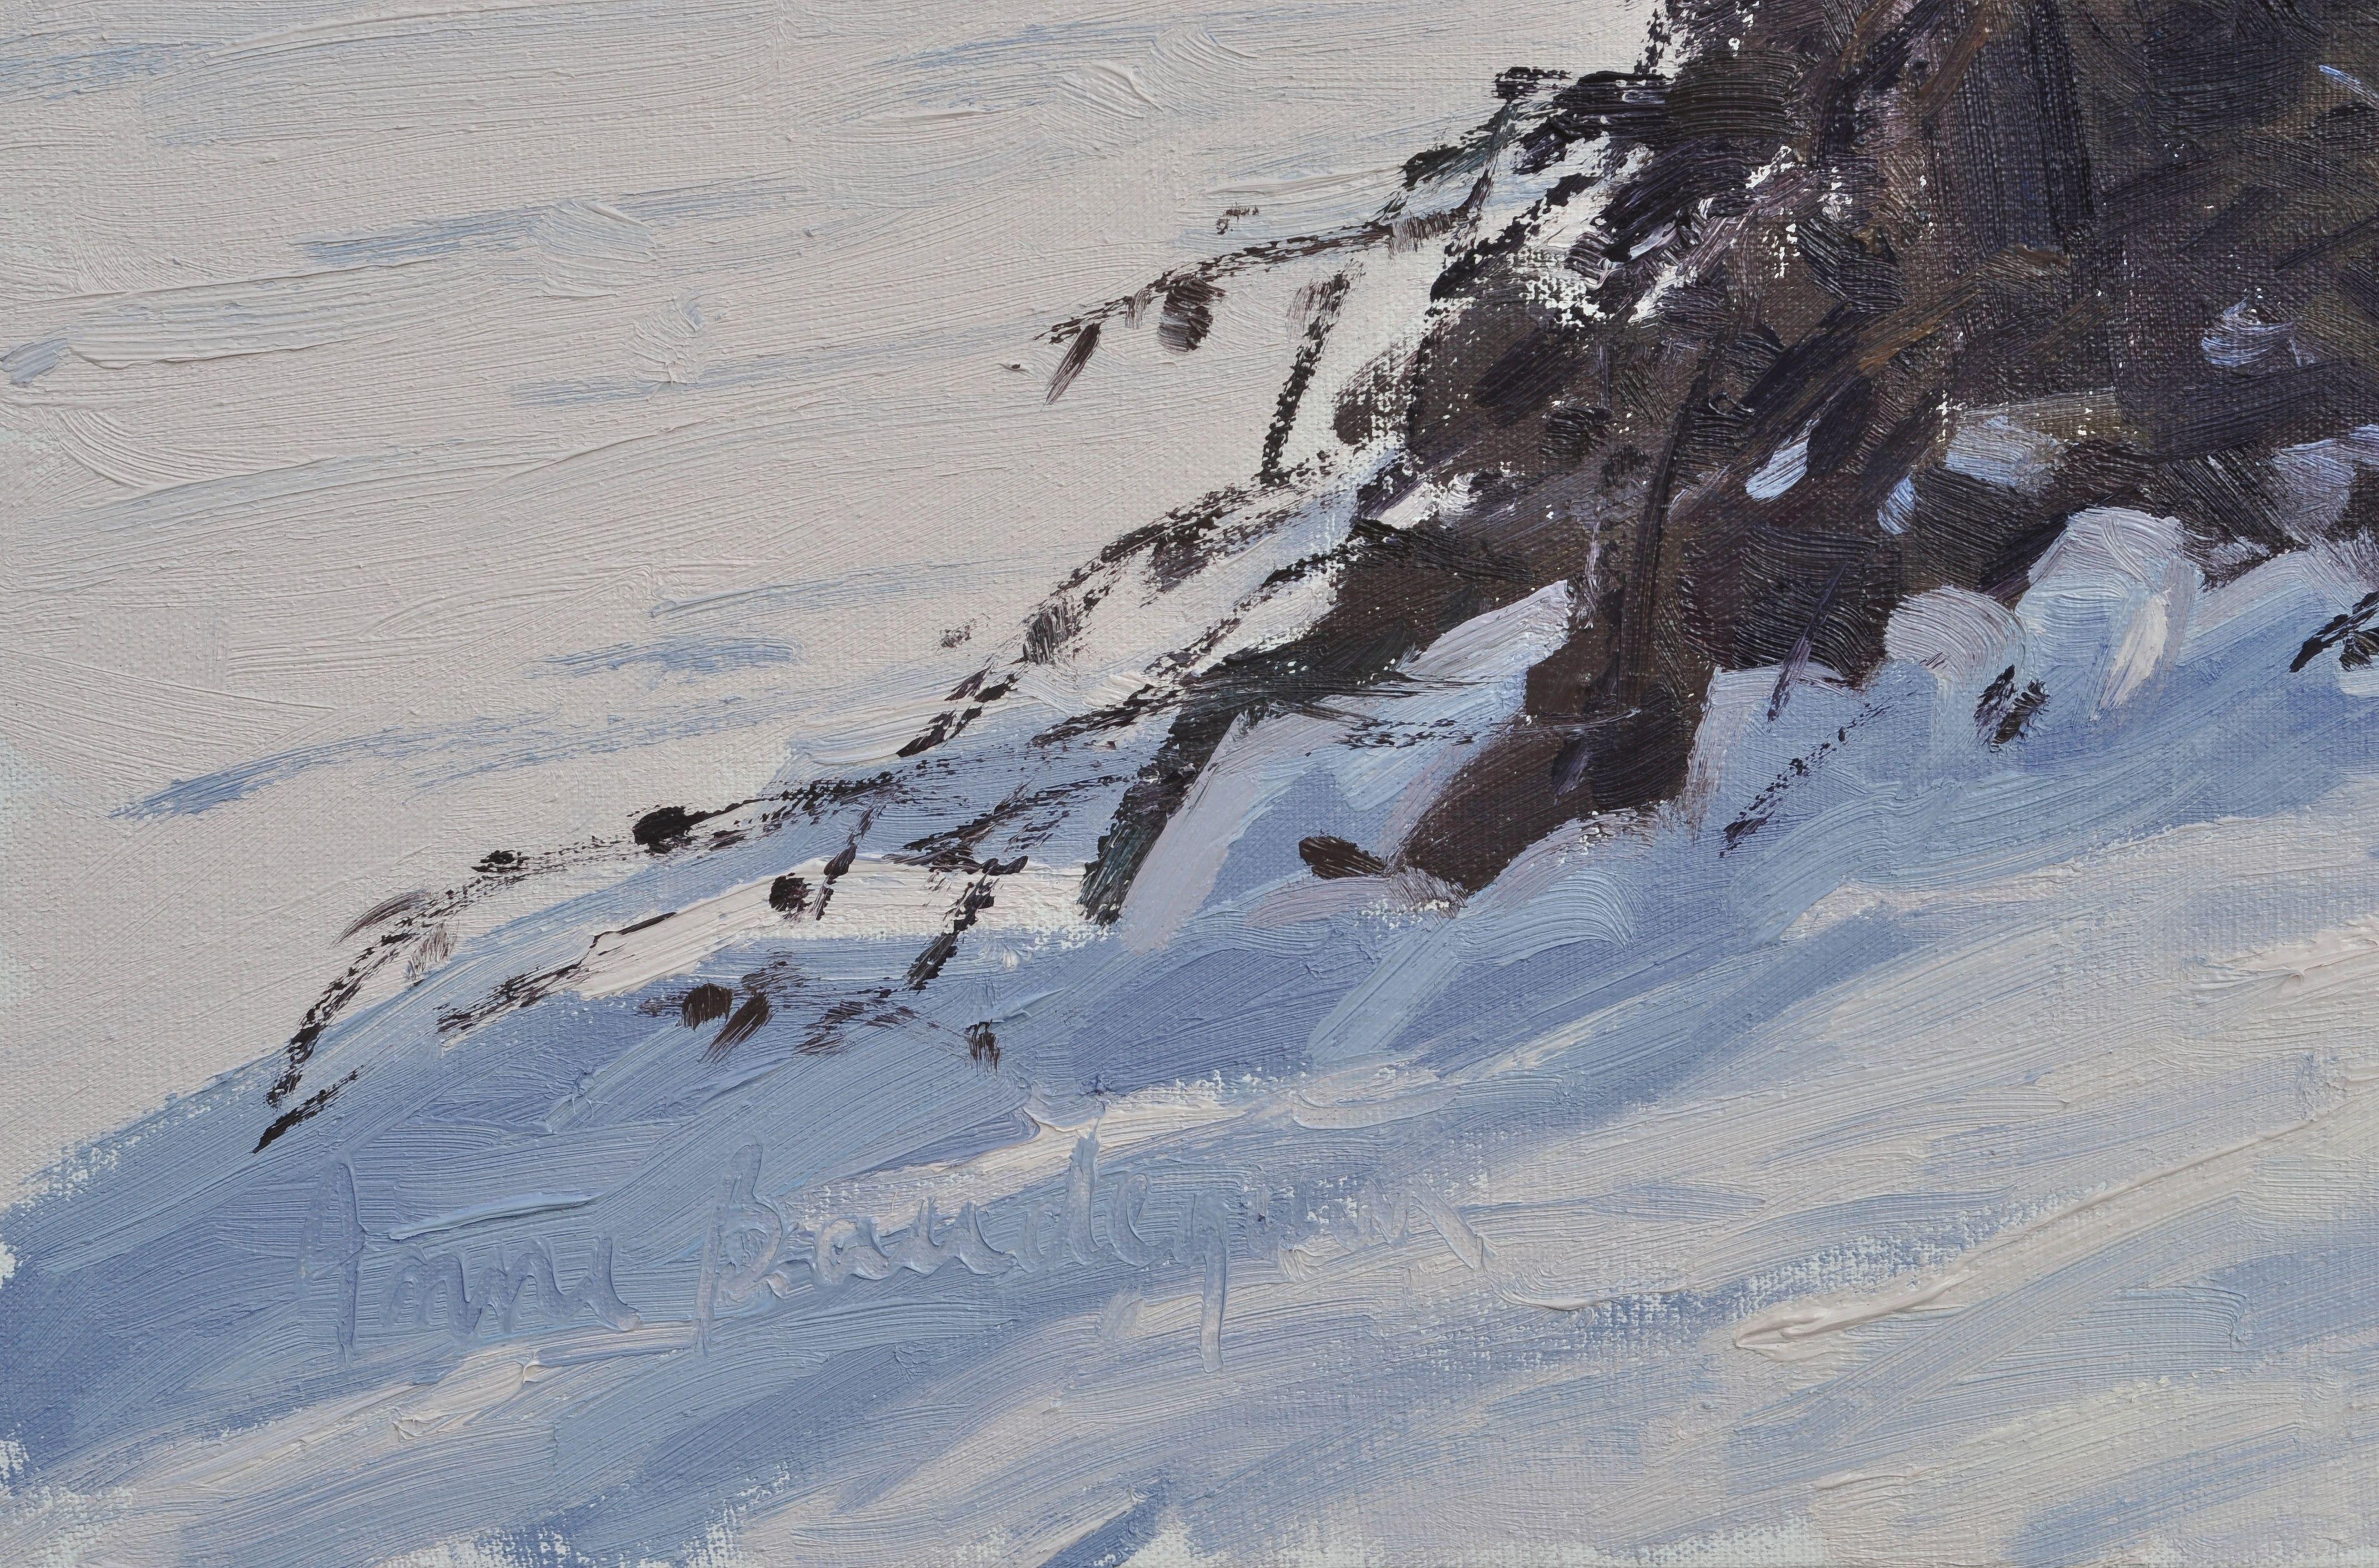 January 7, path in the snow at Saint Vincent, Painting, Oil on Canvas 3